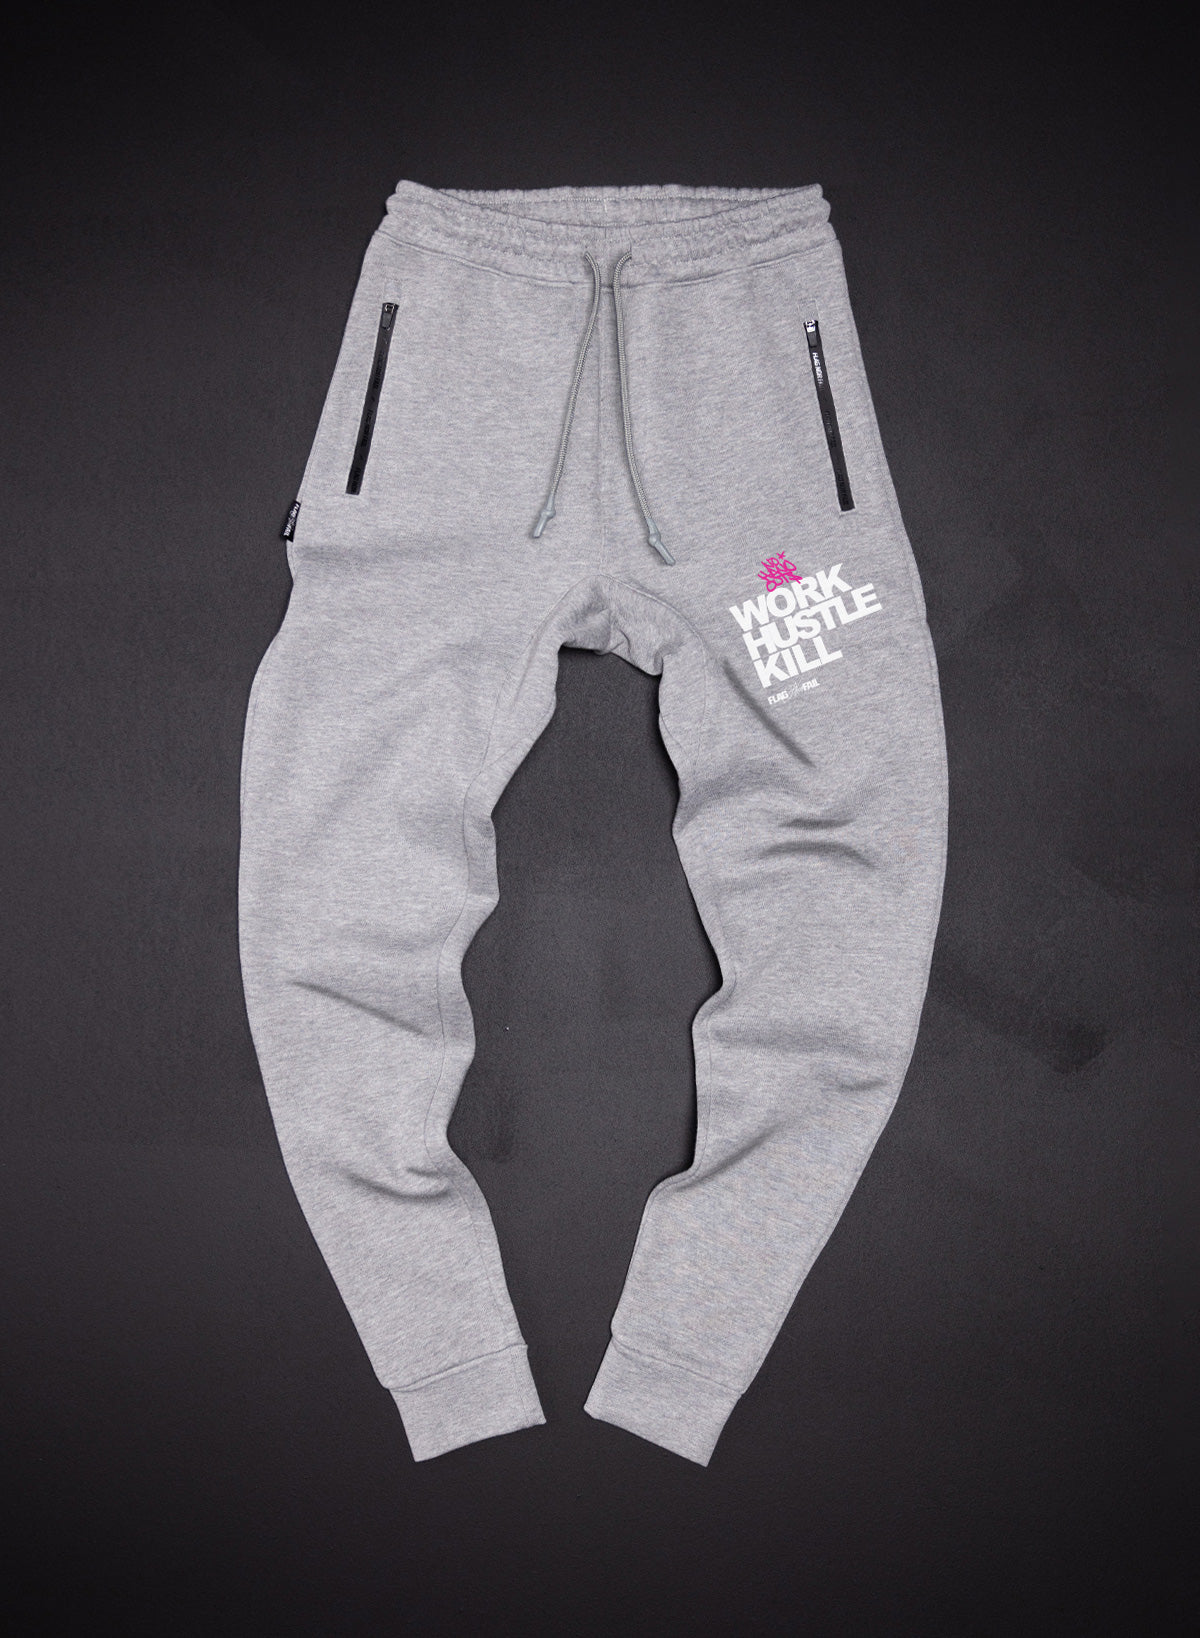 WORK HUSTLE KILL - FITTED JOGGERS - GREY